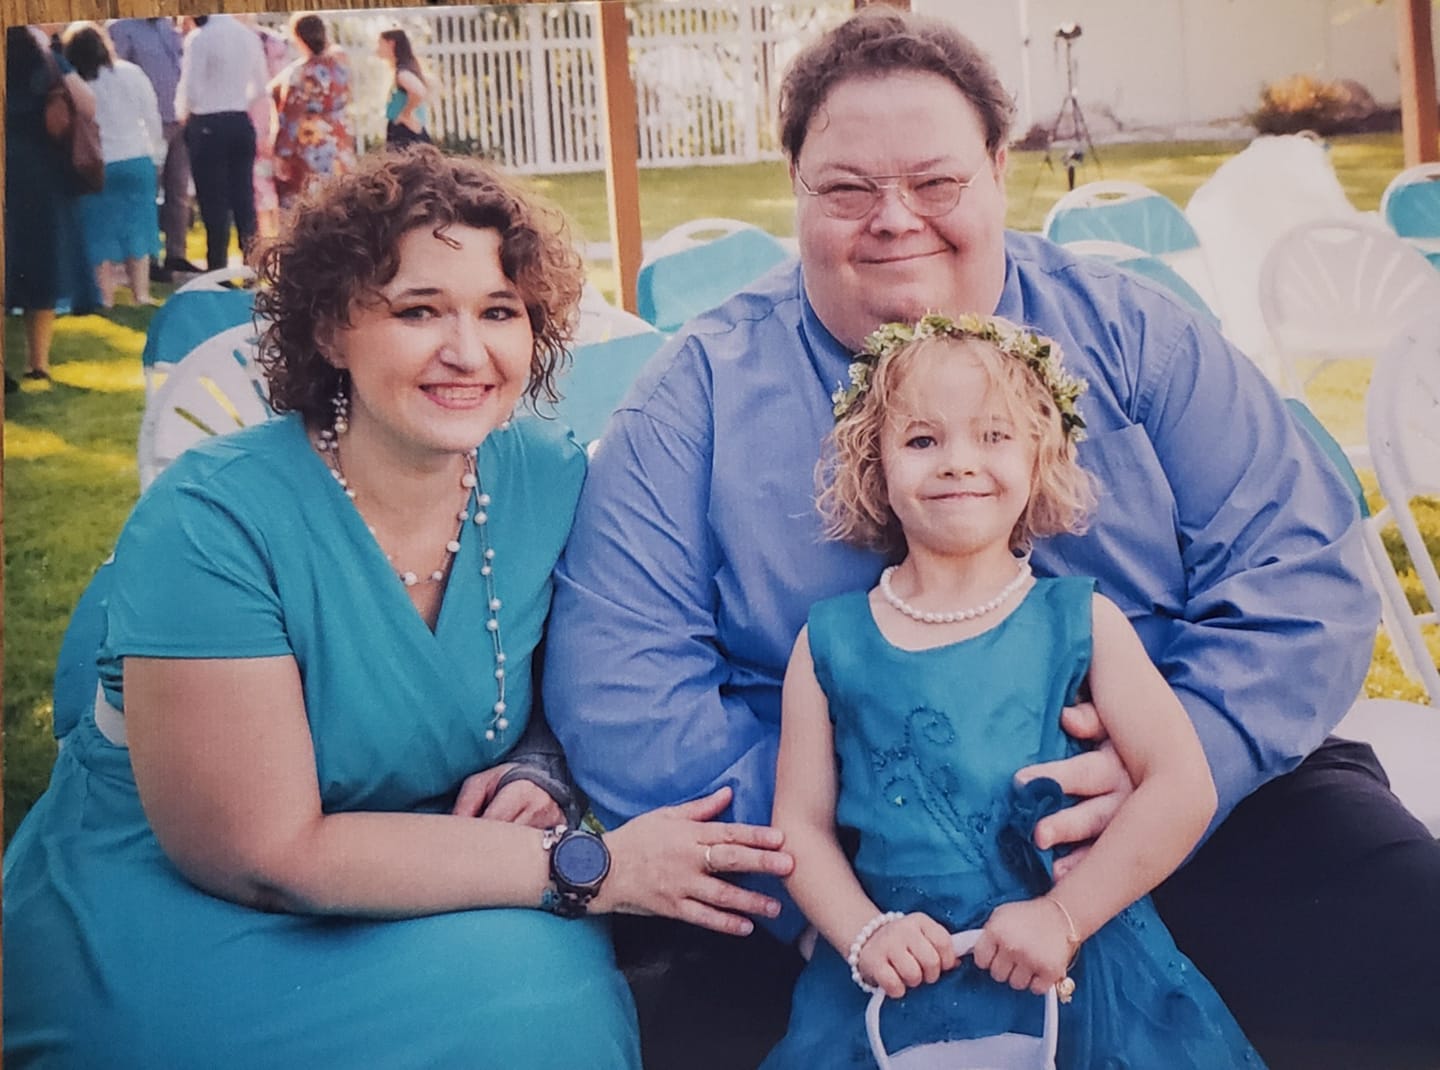 Smiling family in teal outfits, consisting of a man, woman, and a little girl wearing a teal dress